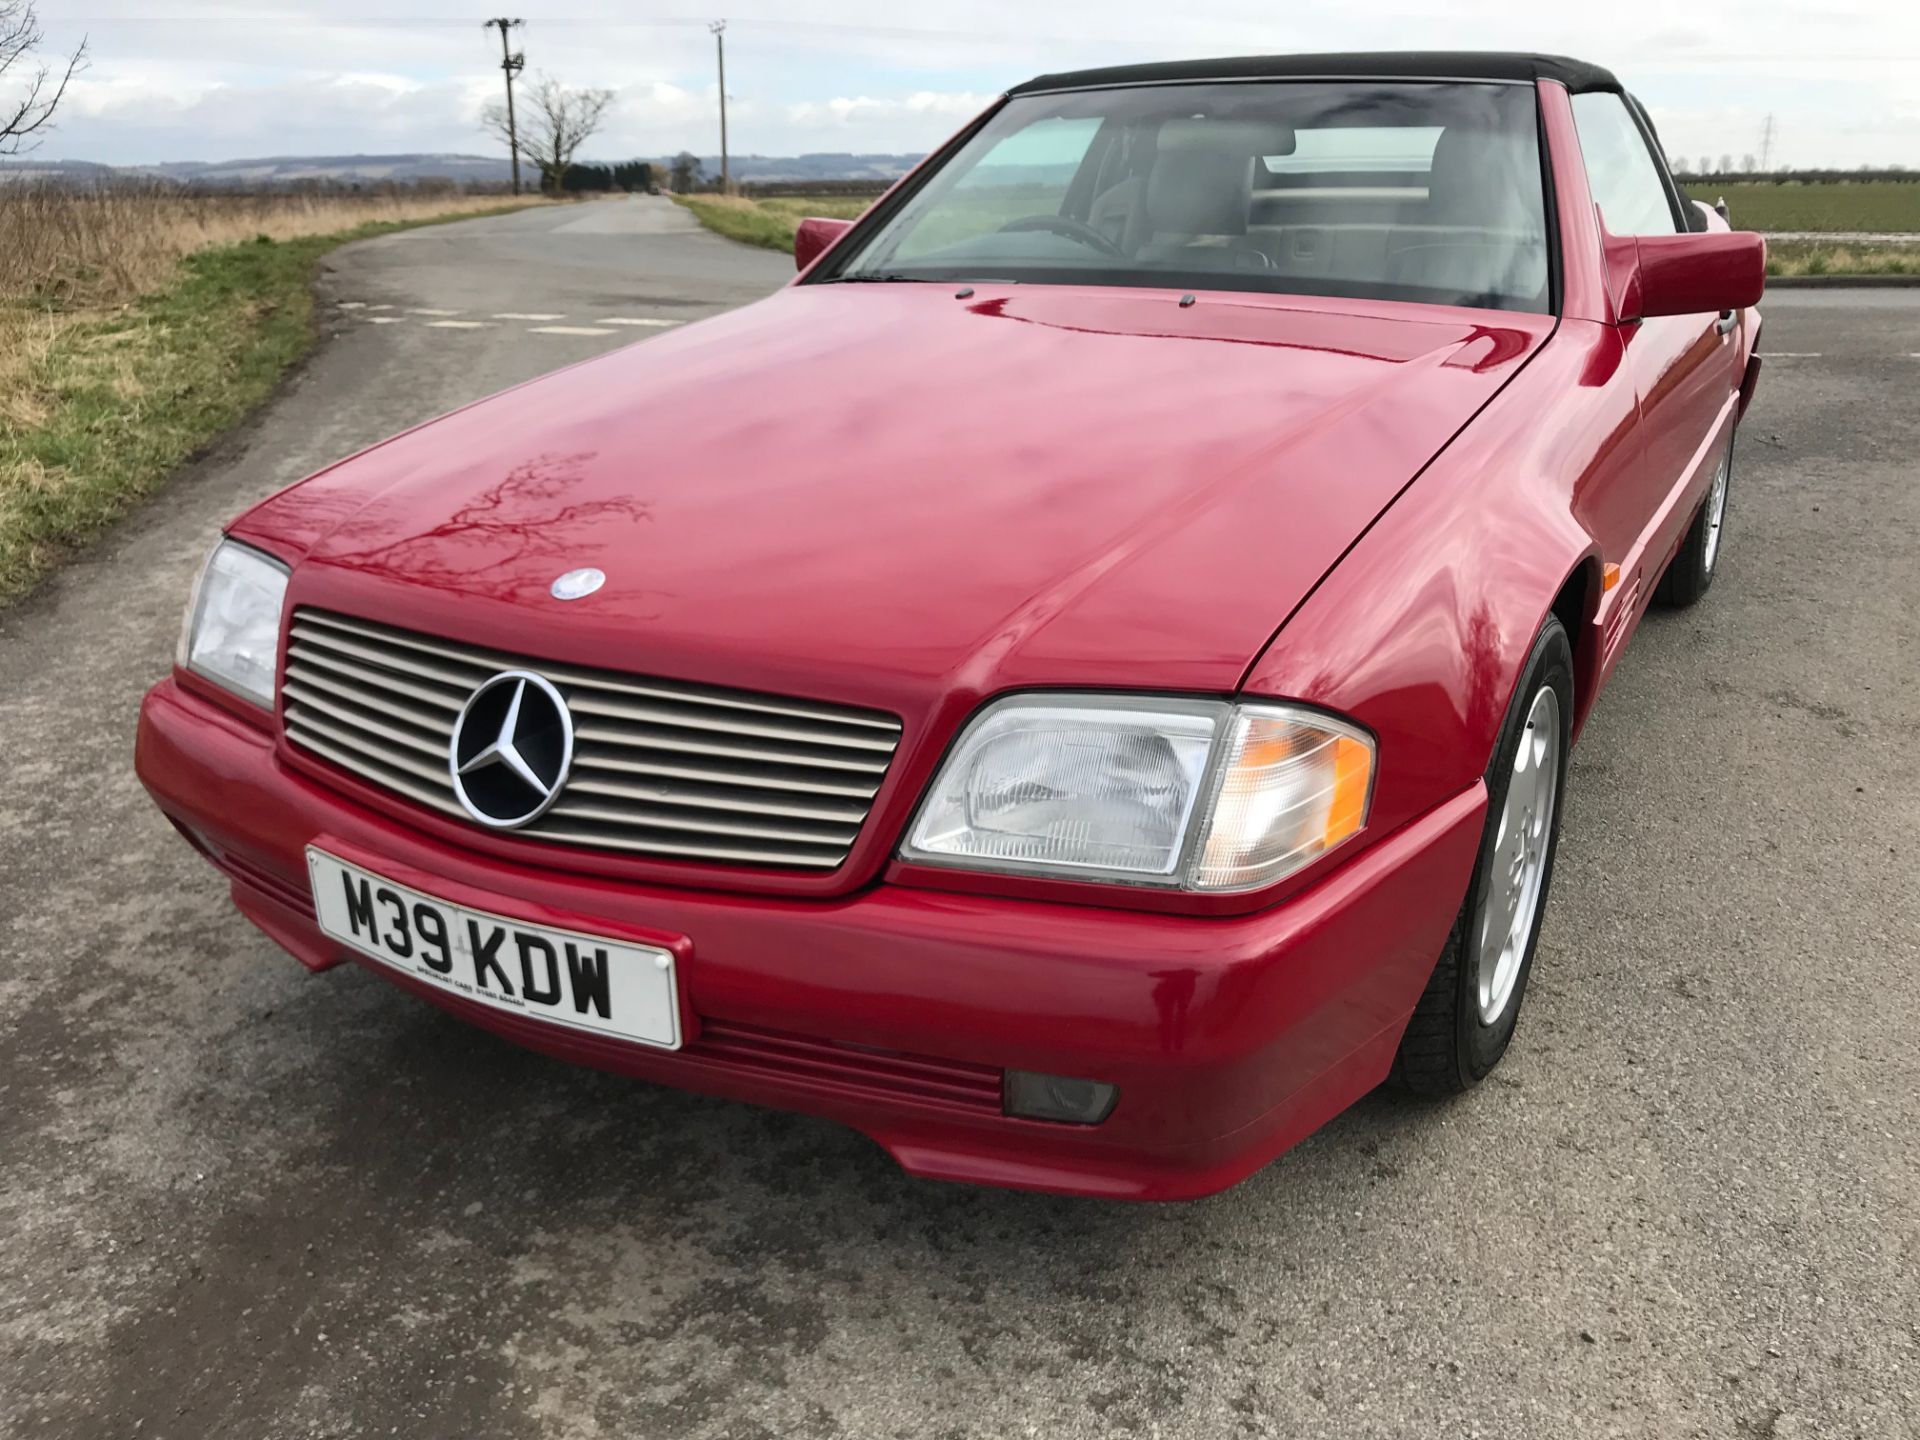 1994 Mercedes 280 SL Convertible Automatic - Image 9 of 49